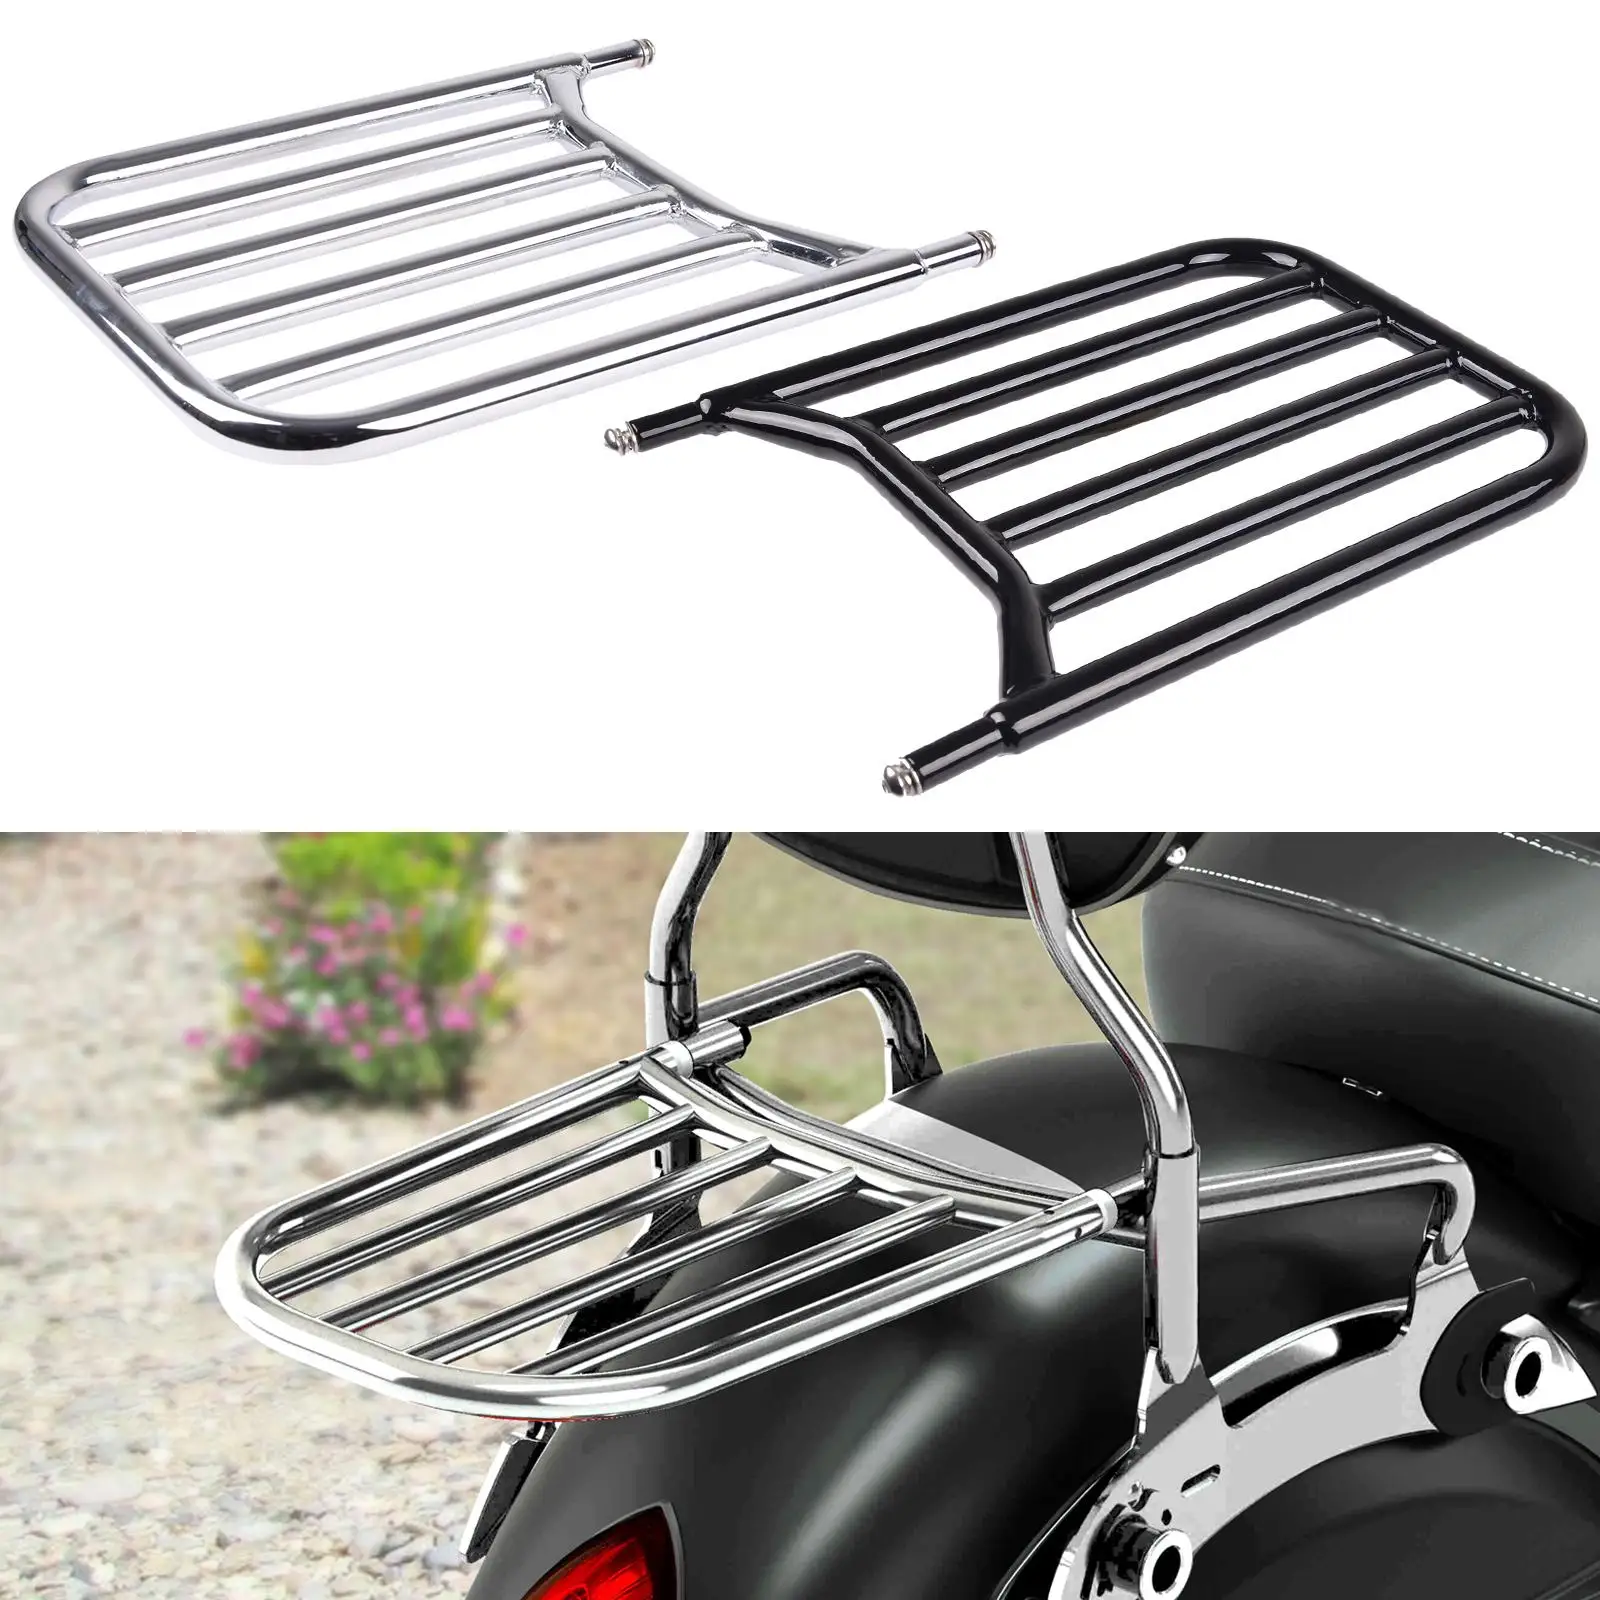 Backrest Sissy Bar Luggage Rack Fit for Roadmaster Indian tain